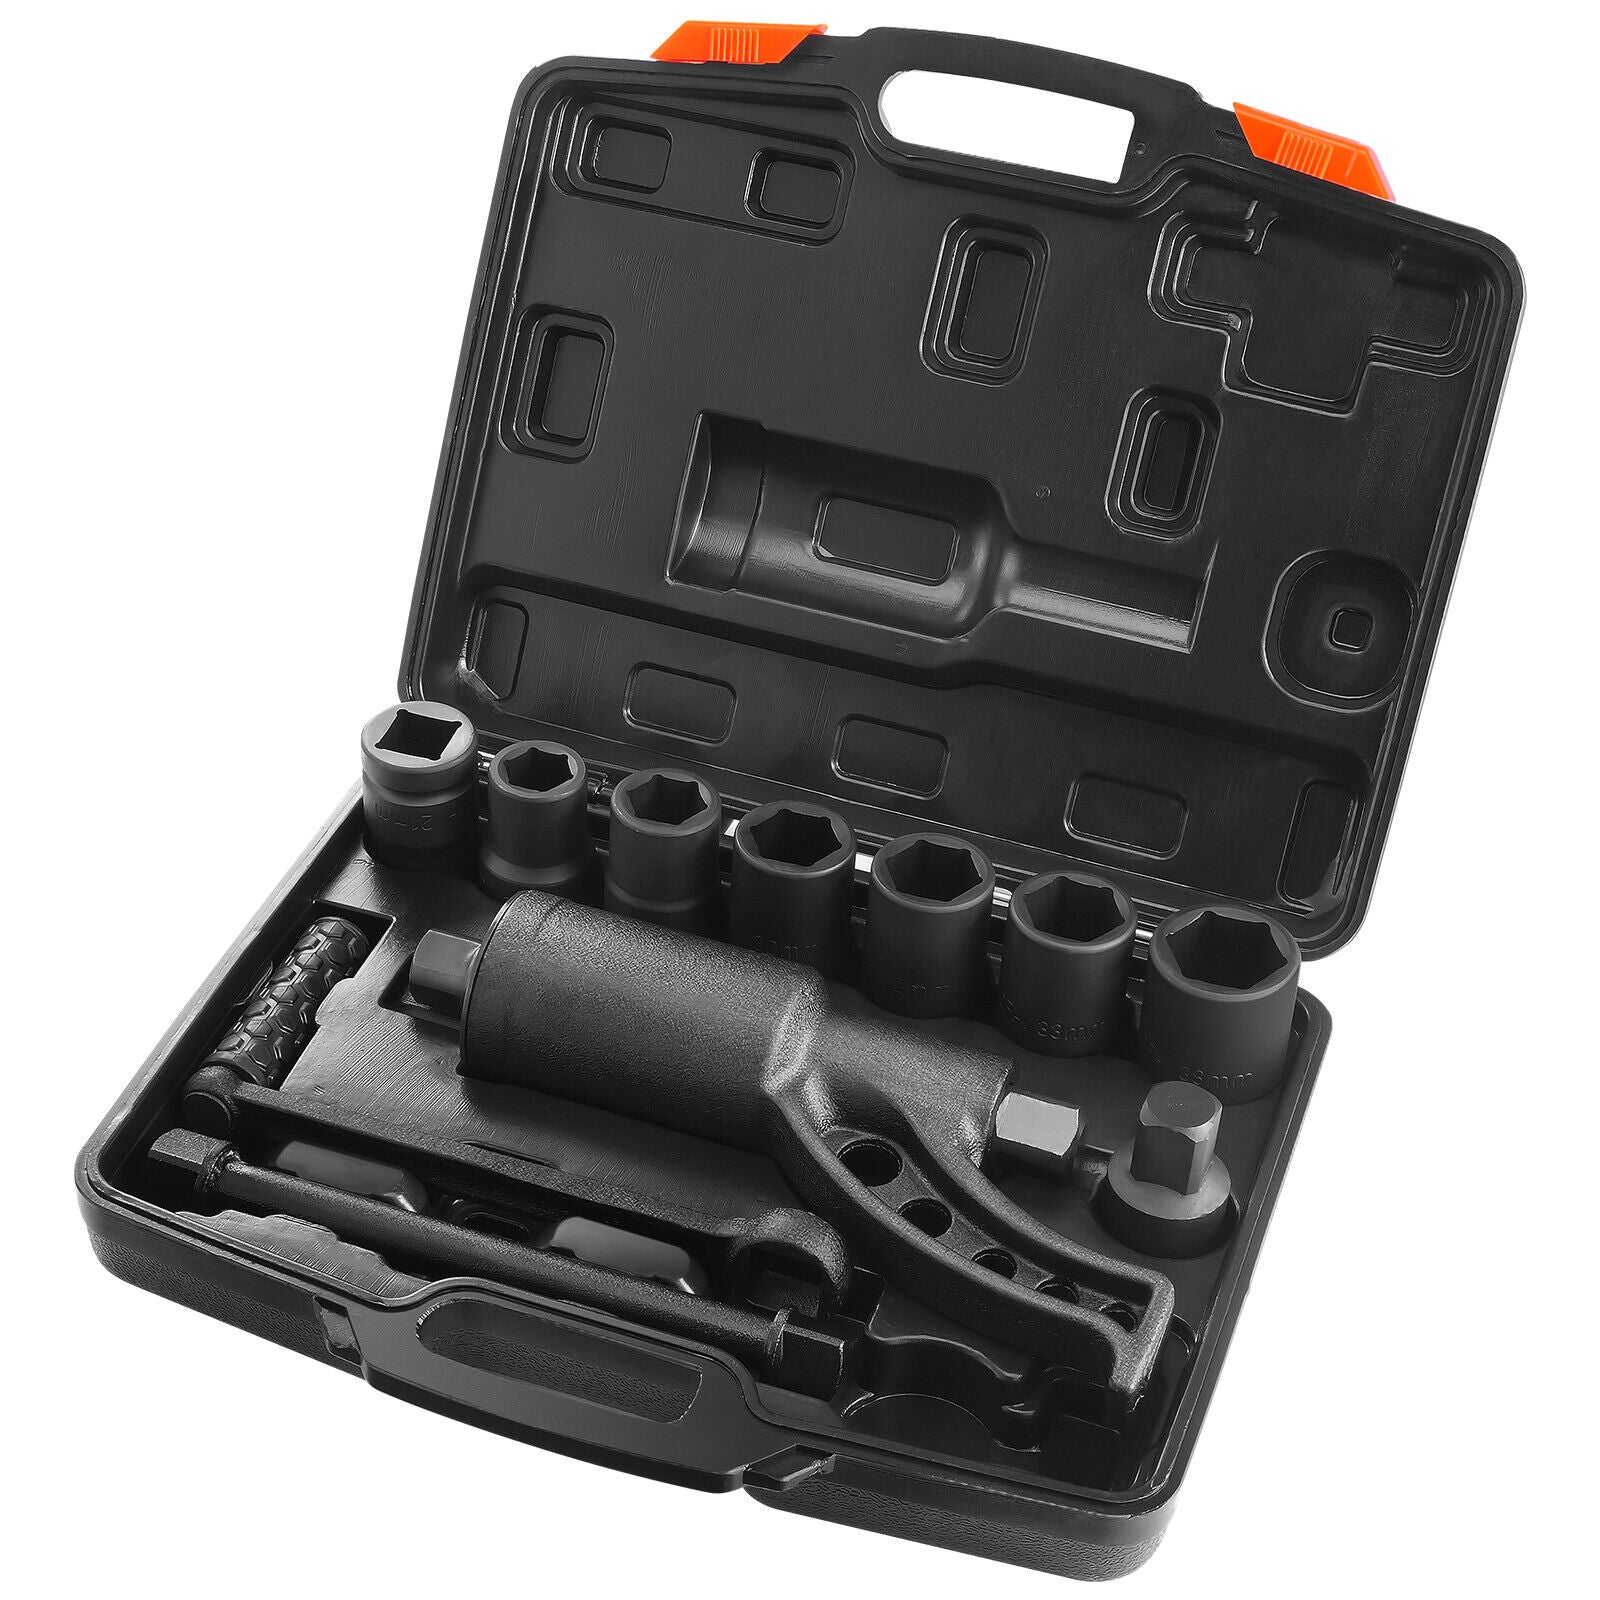 1" Drive 1:64 Lug Nut Remover Torque Multiplier Wrench Set with 8 Sockets